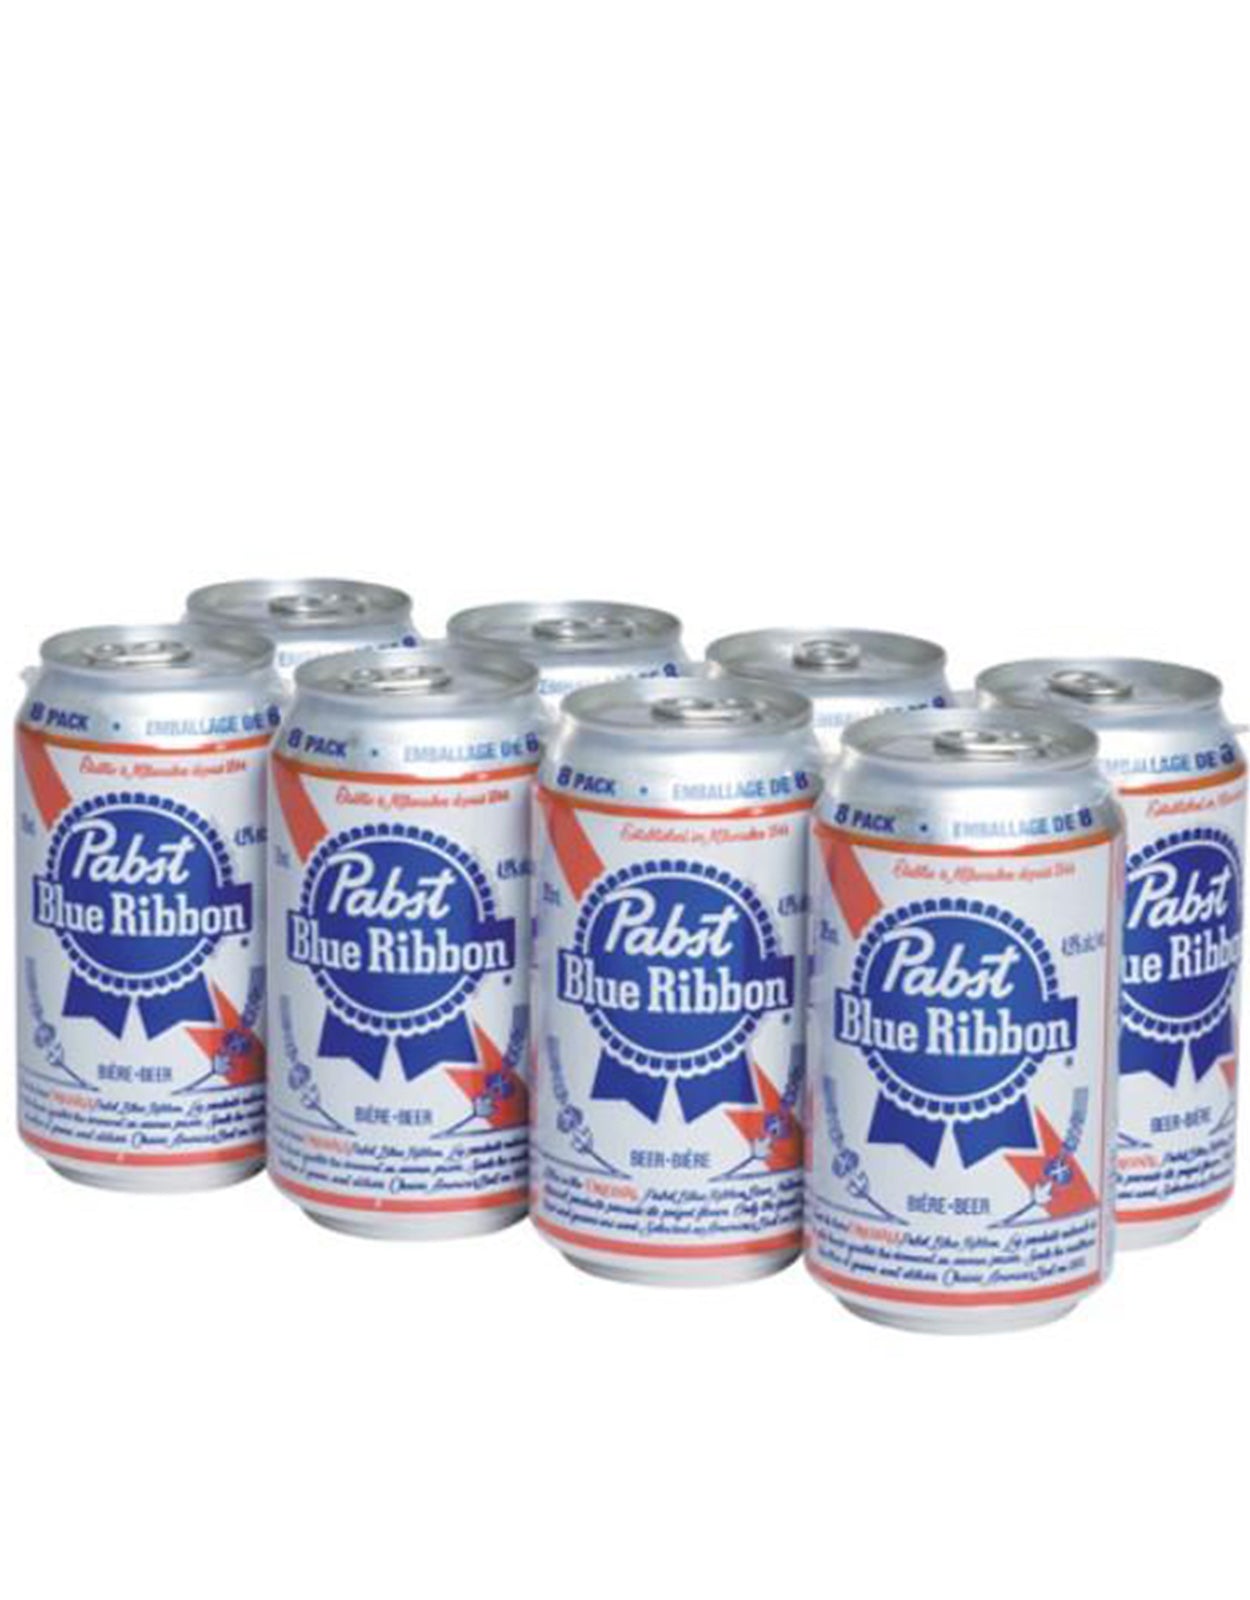 Pabst Blue Ribbon 355 ml - 8 Cans